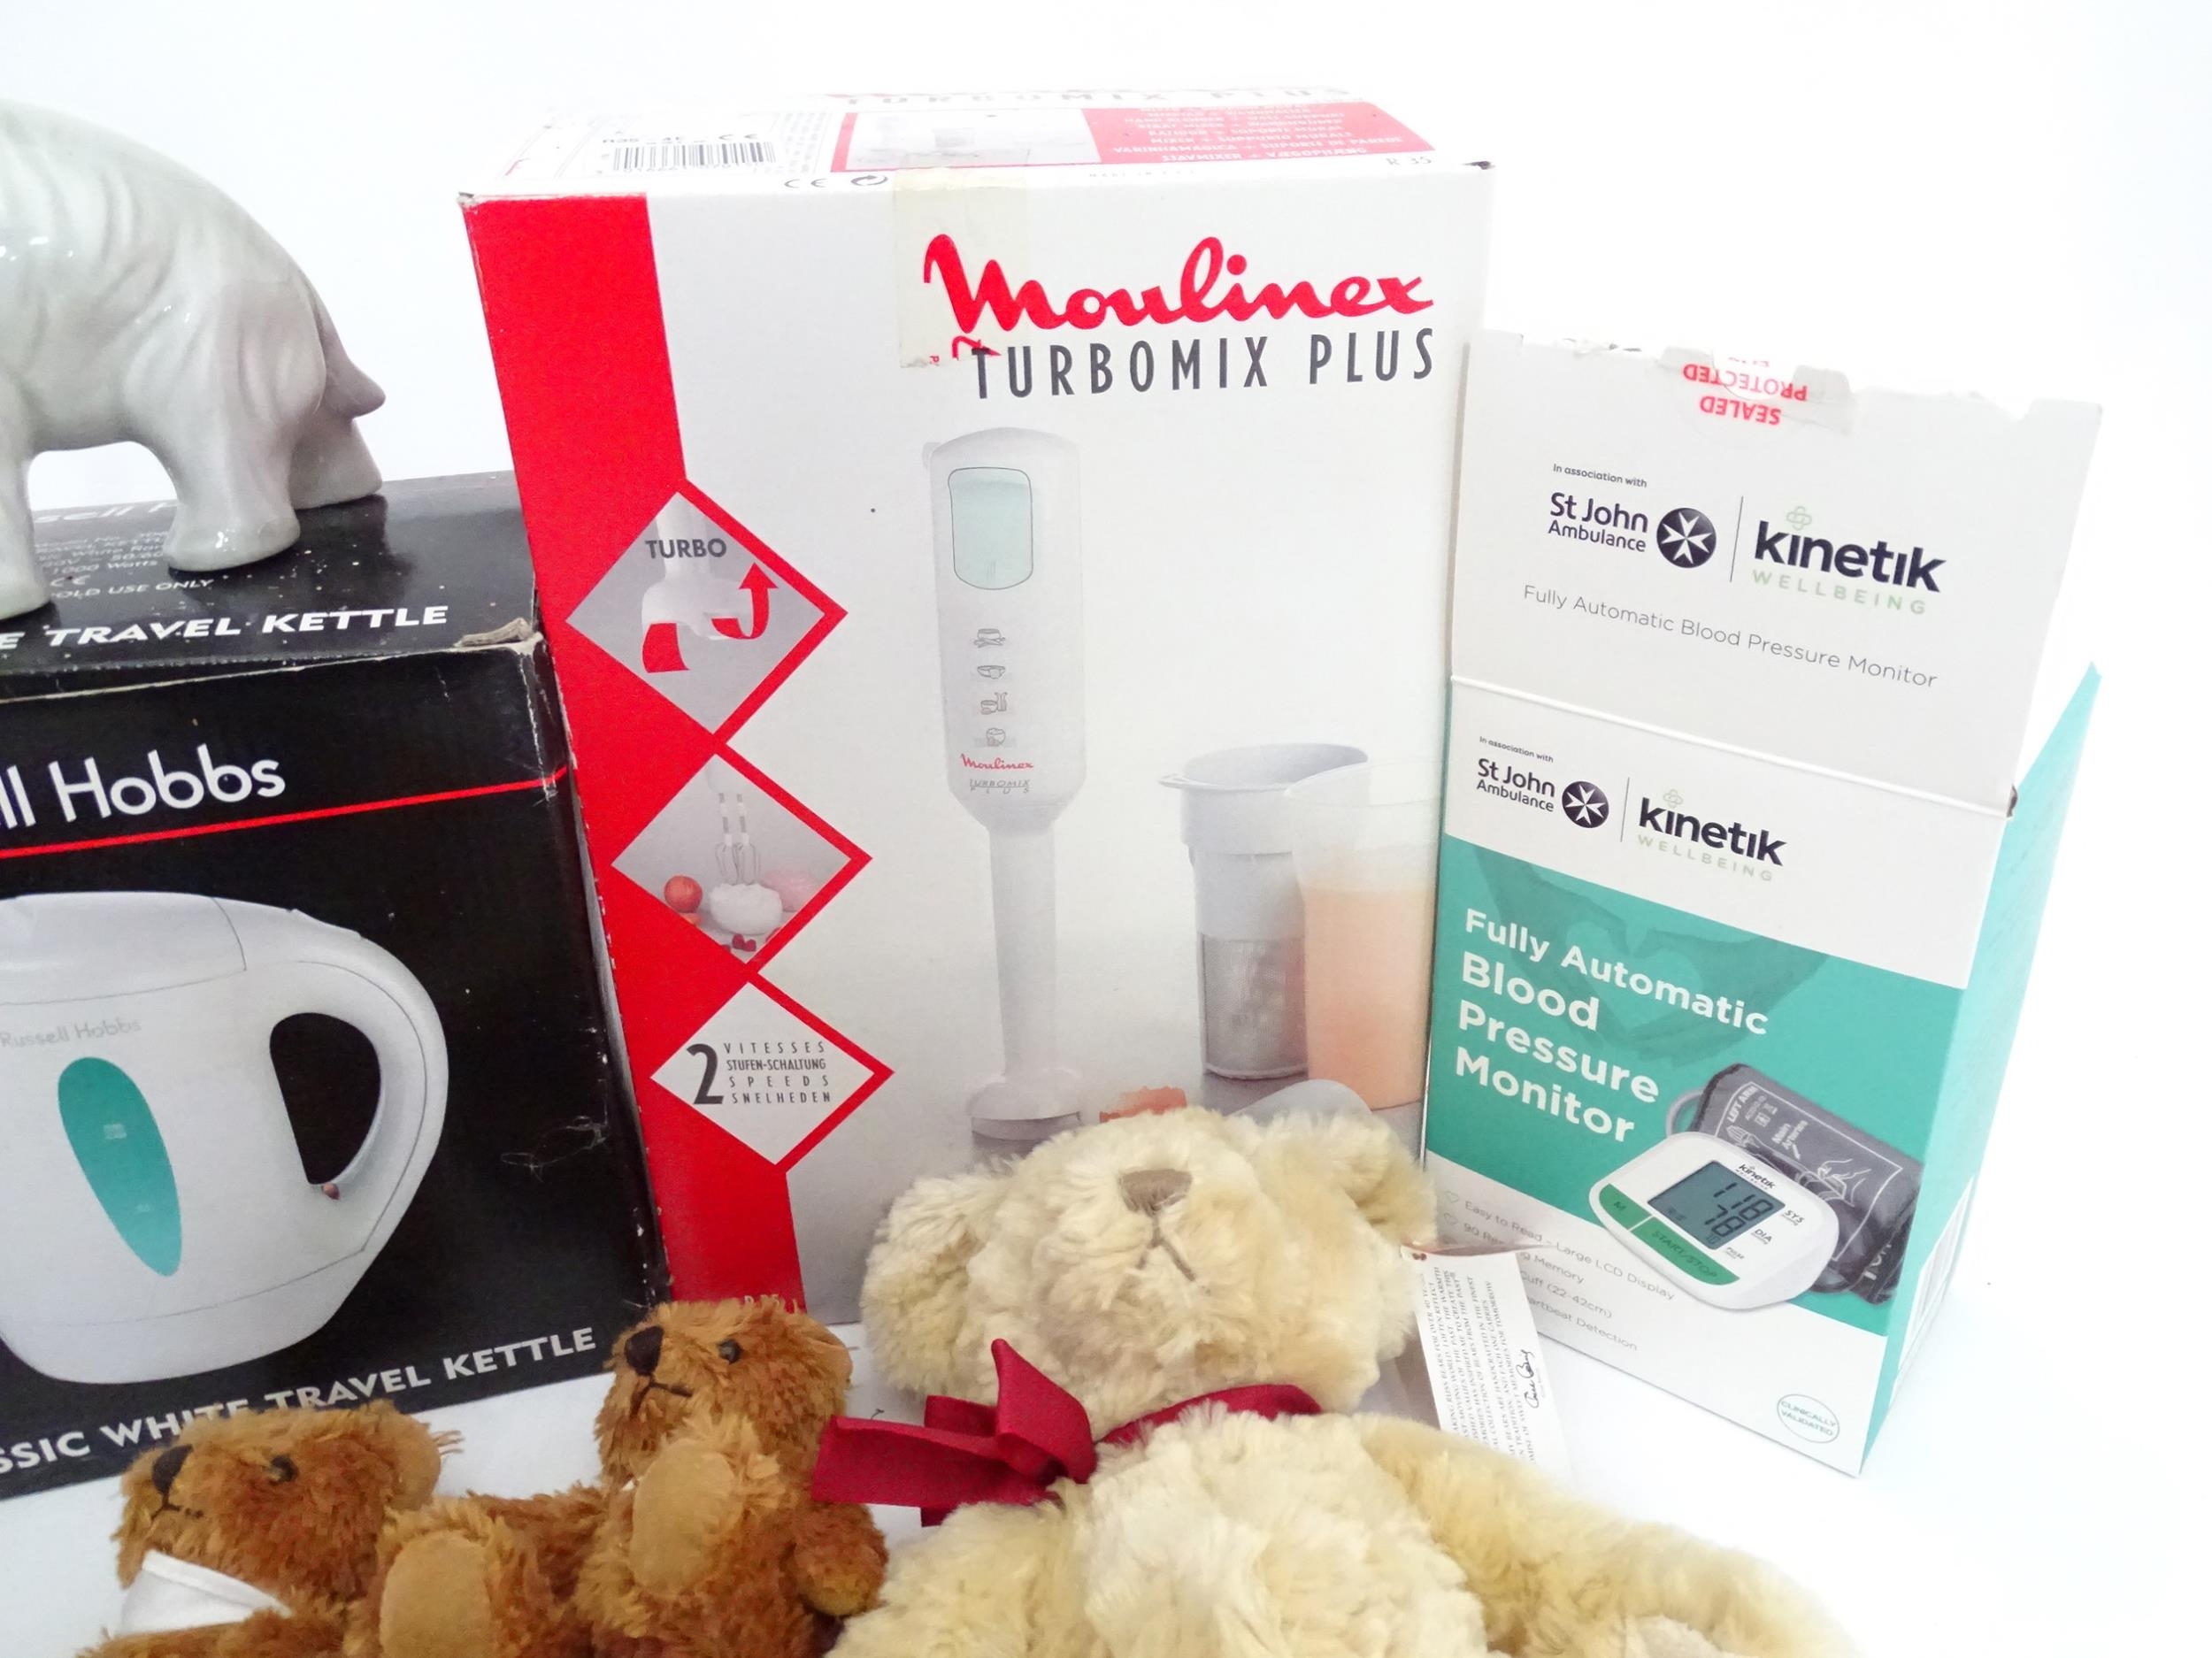 A quantity of miscellaneous items to include a blender, teddy bears, blood pressure monitor, etc. - Image 5 of 7